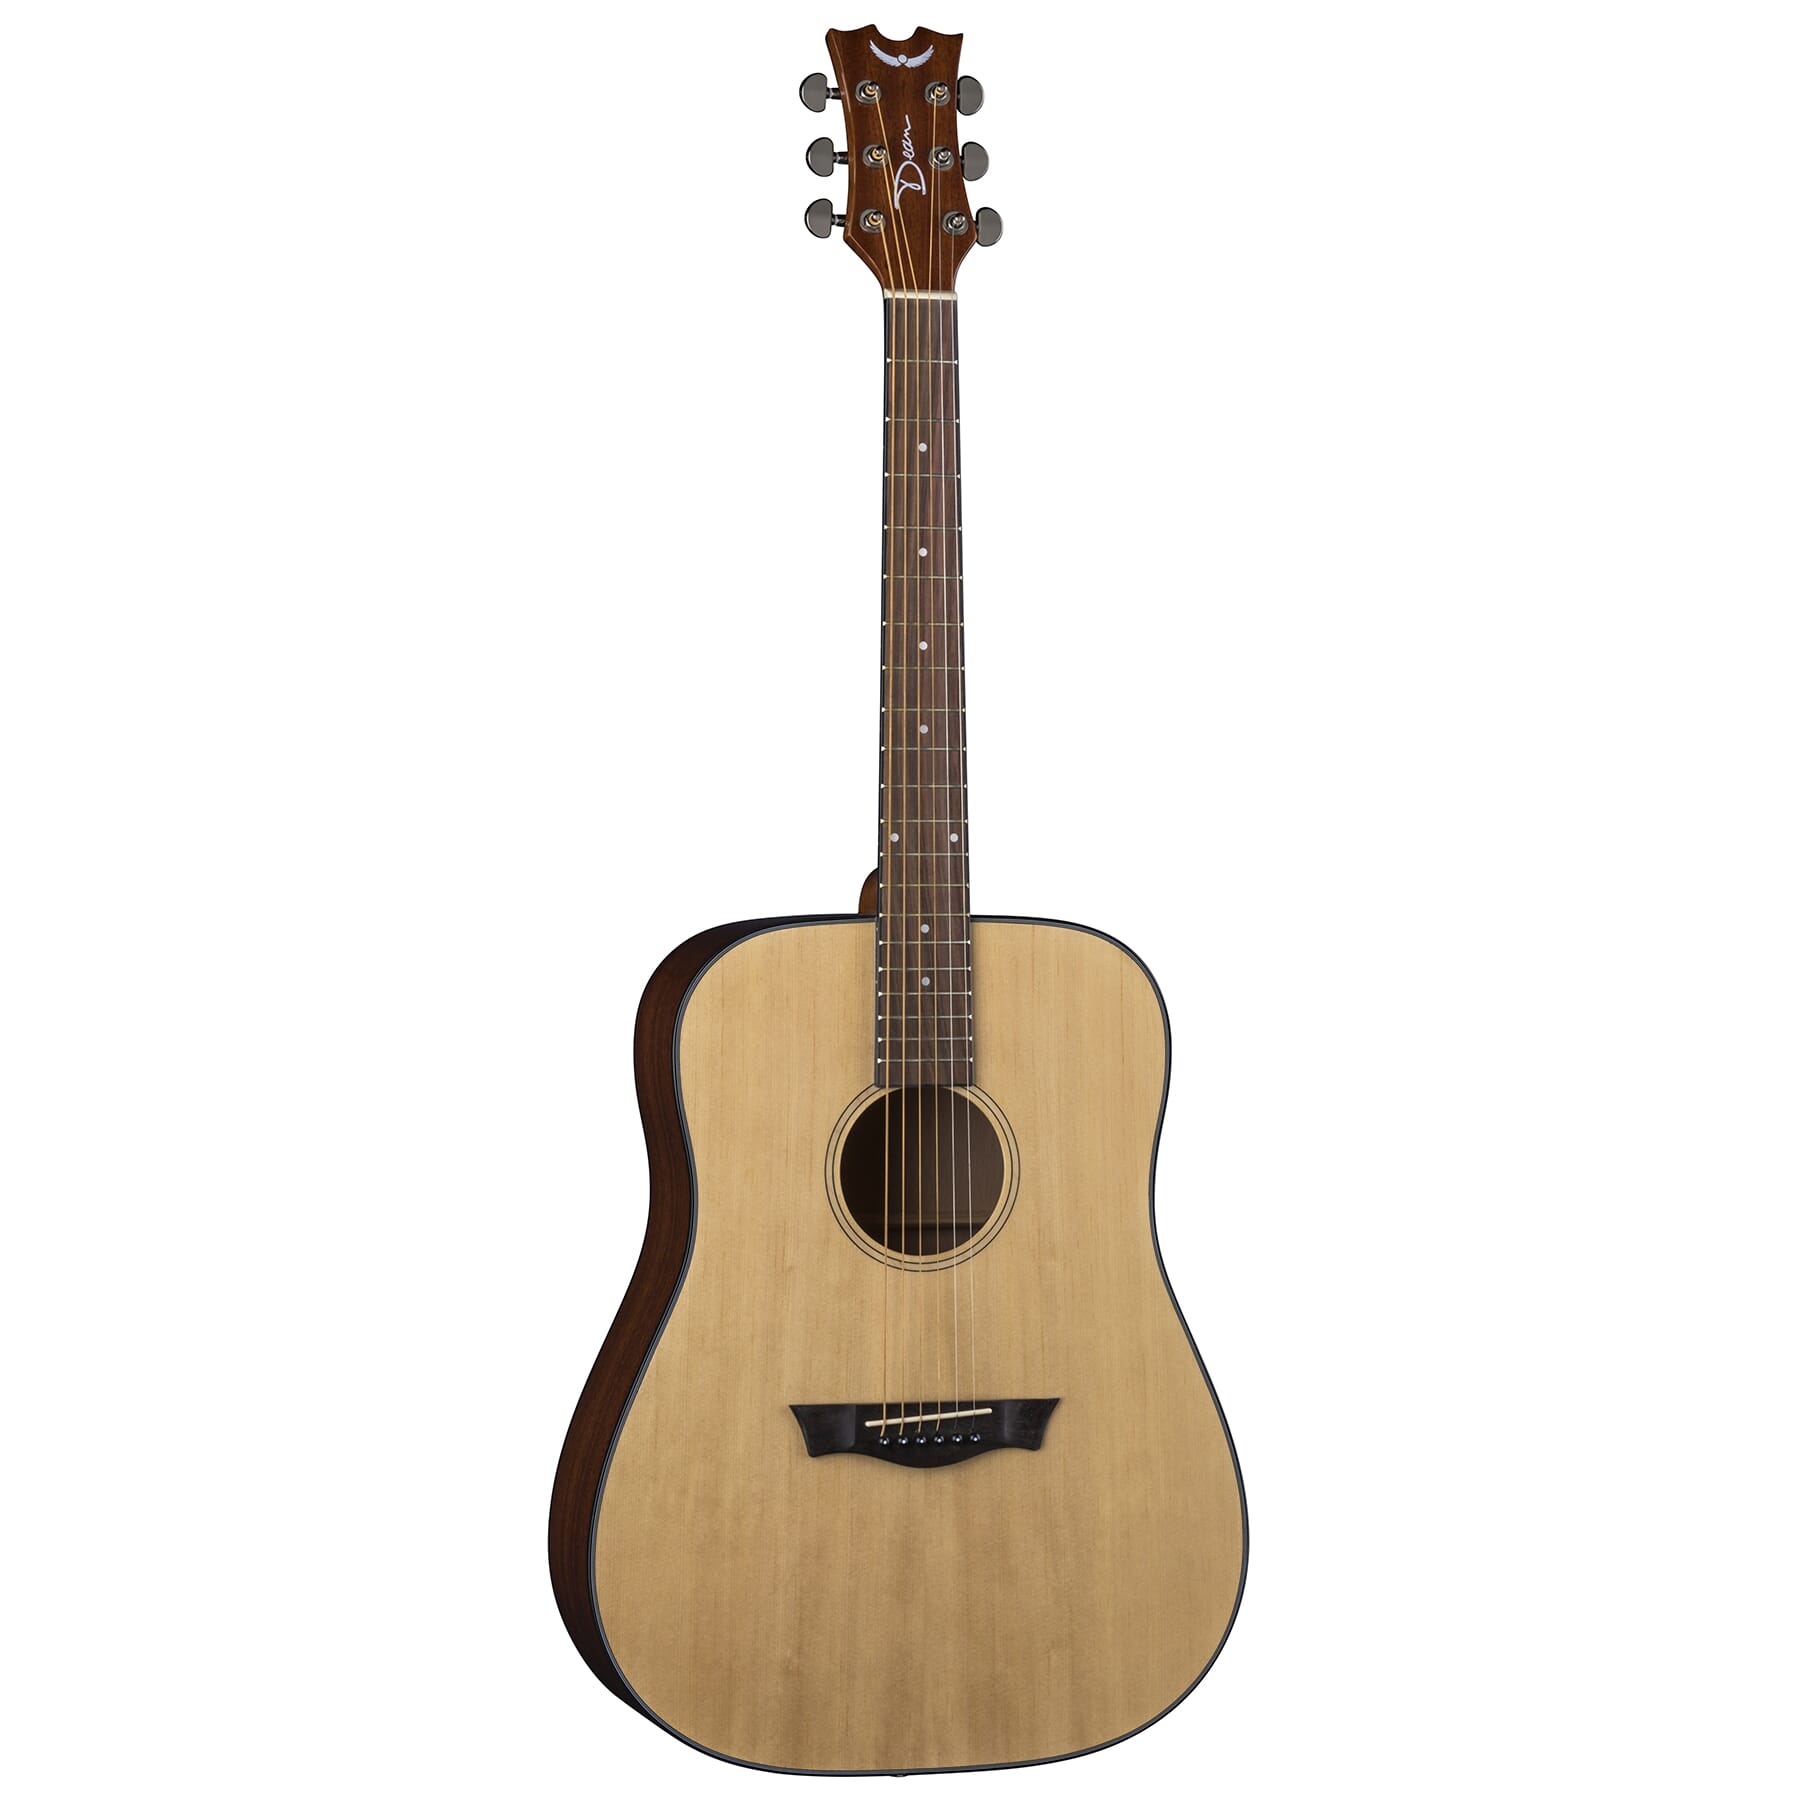 Dean AXS Prodigy Acoustic Package with case and accessories - Gloss Natural Finish